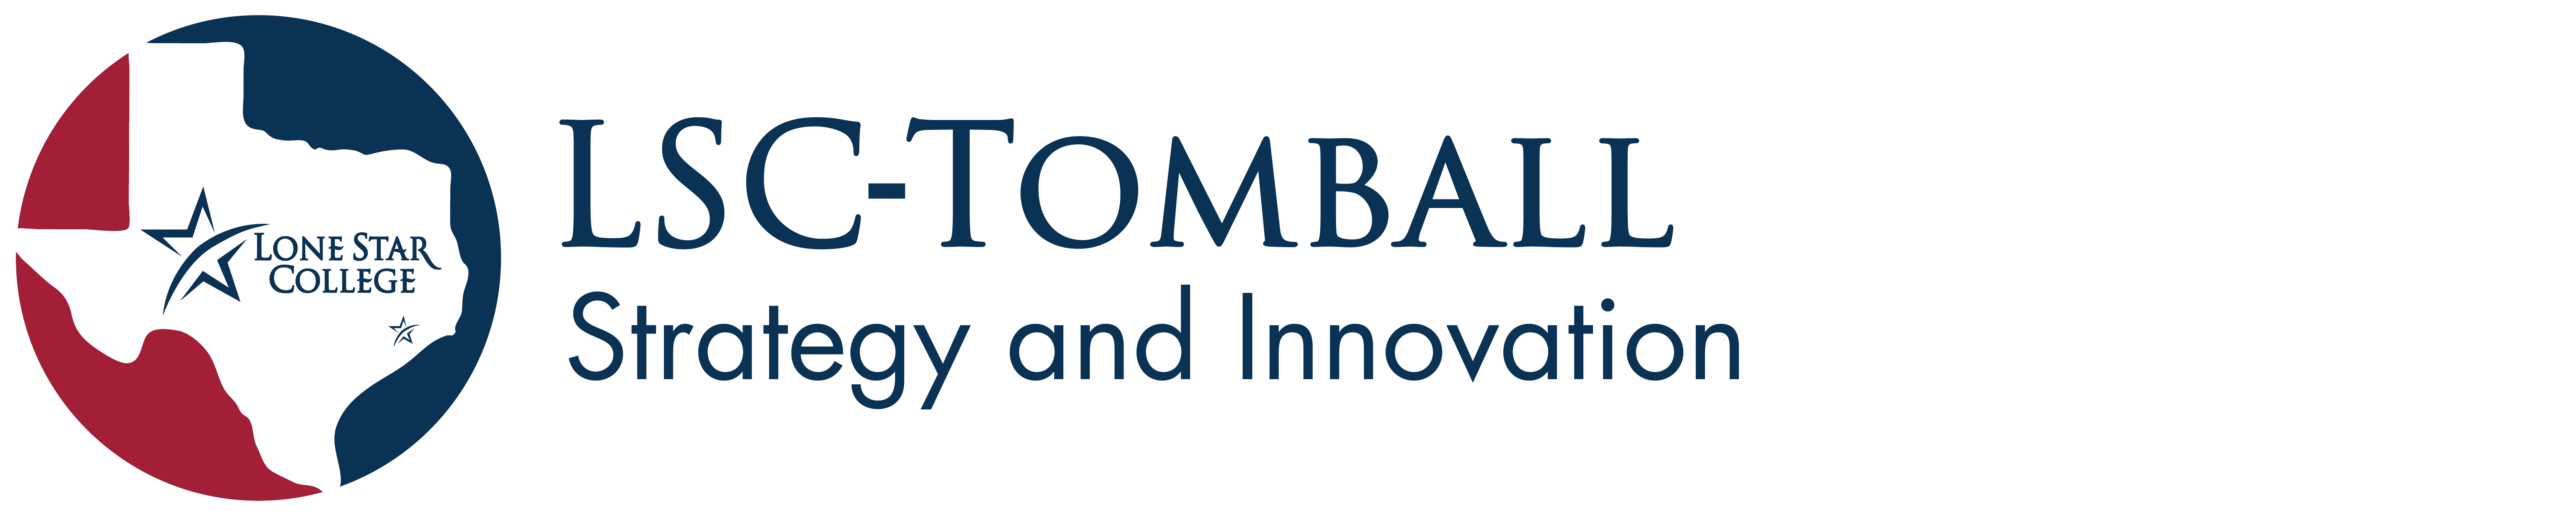 Image of logo for Lone Star College LSC-Tomball Strategy and Innovation